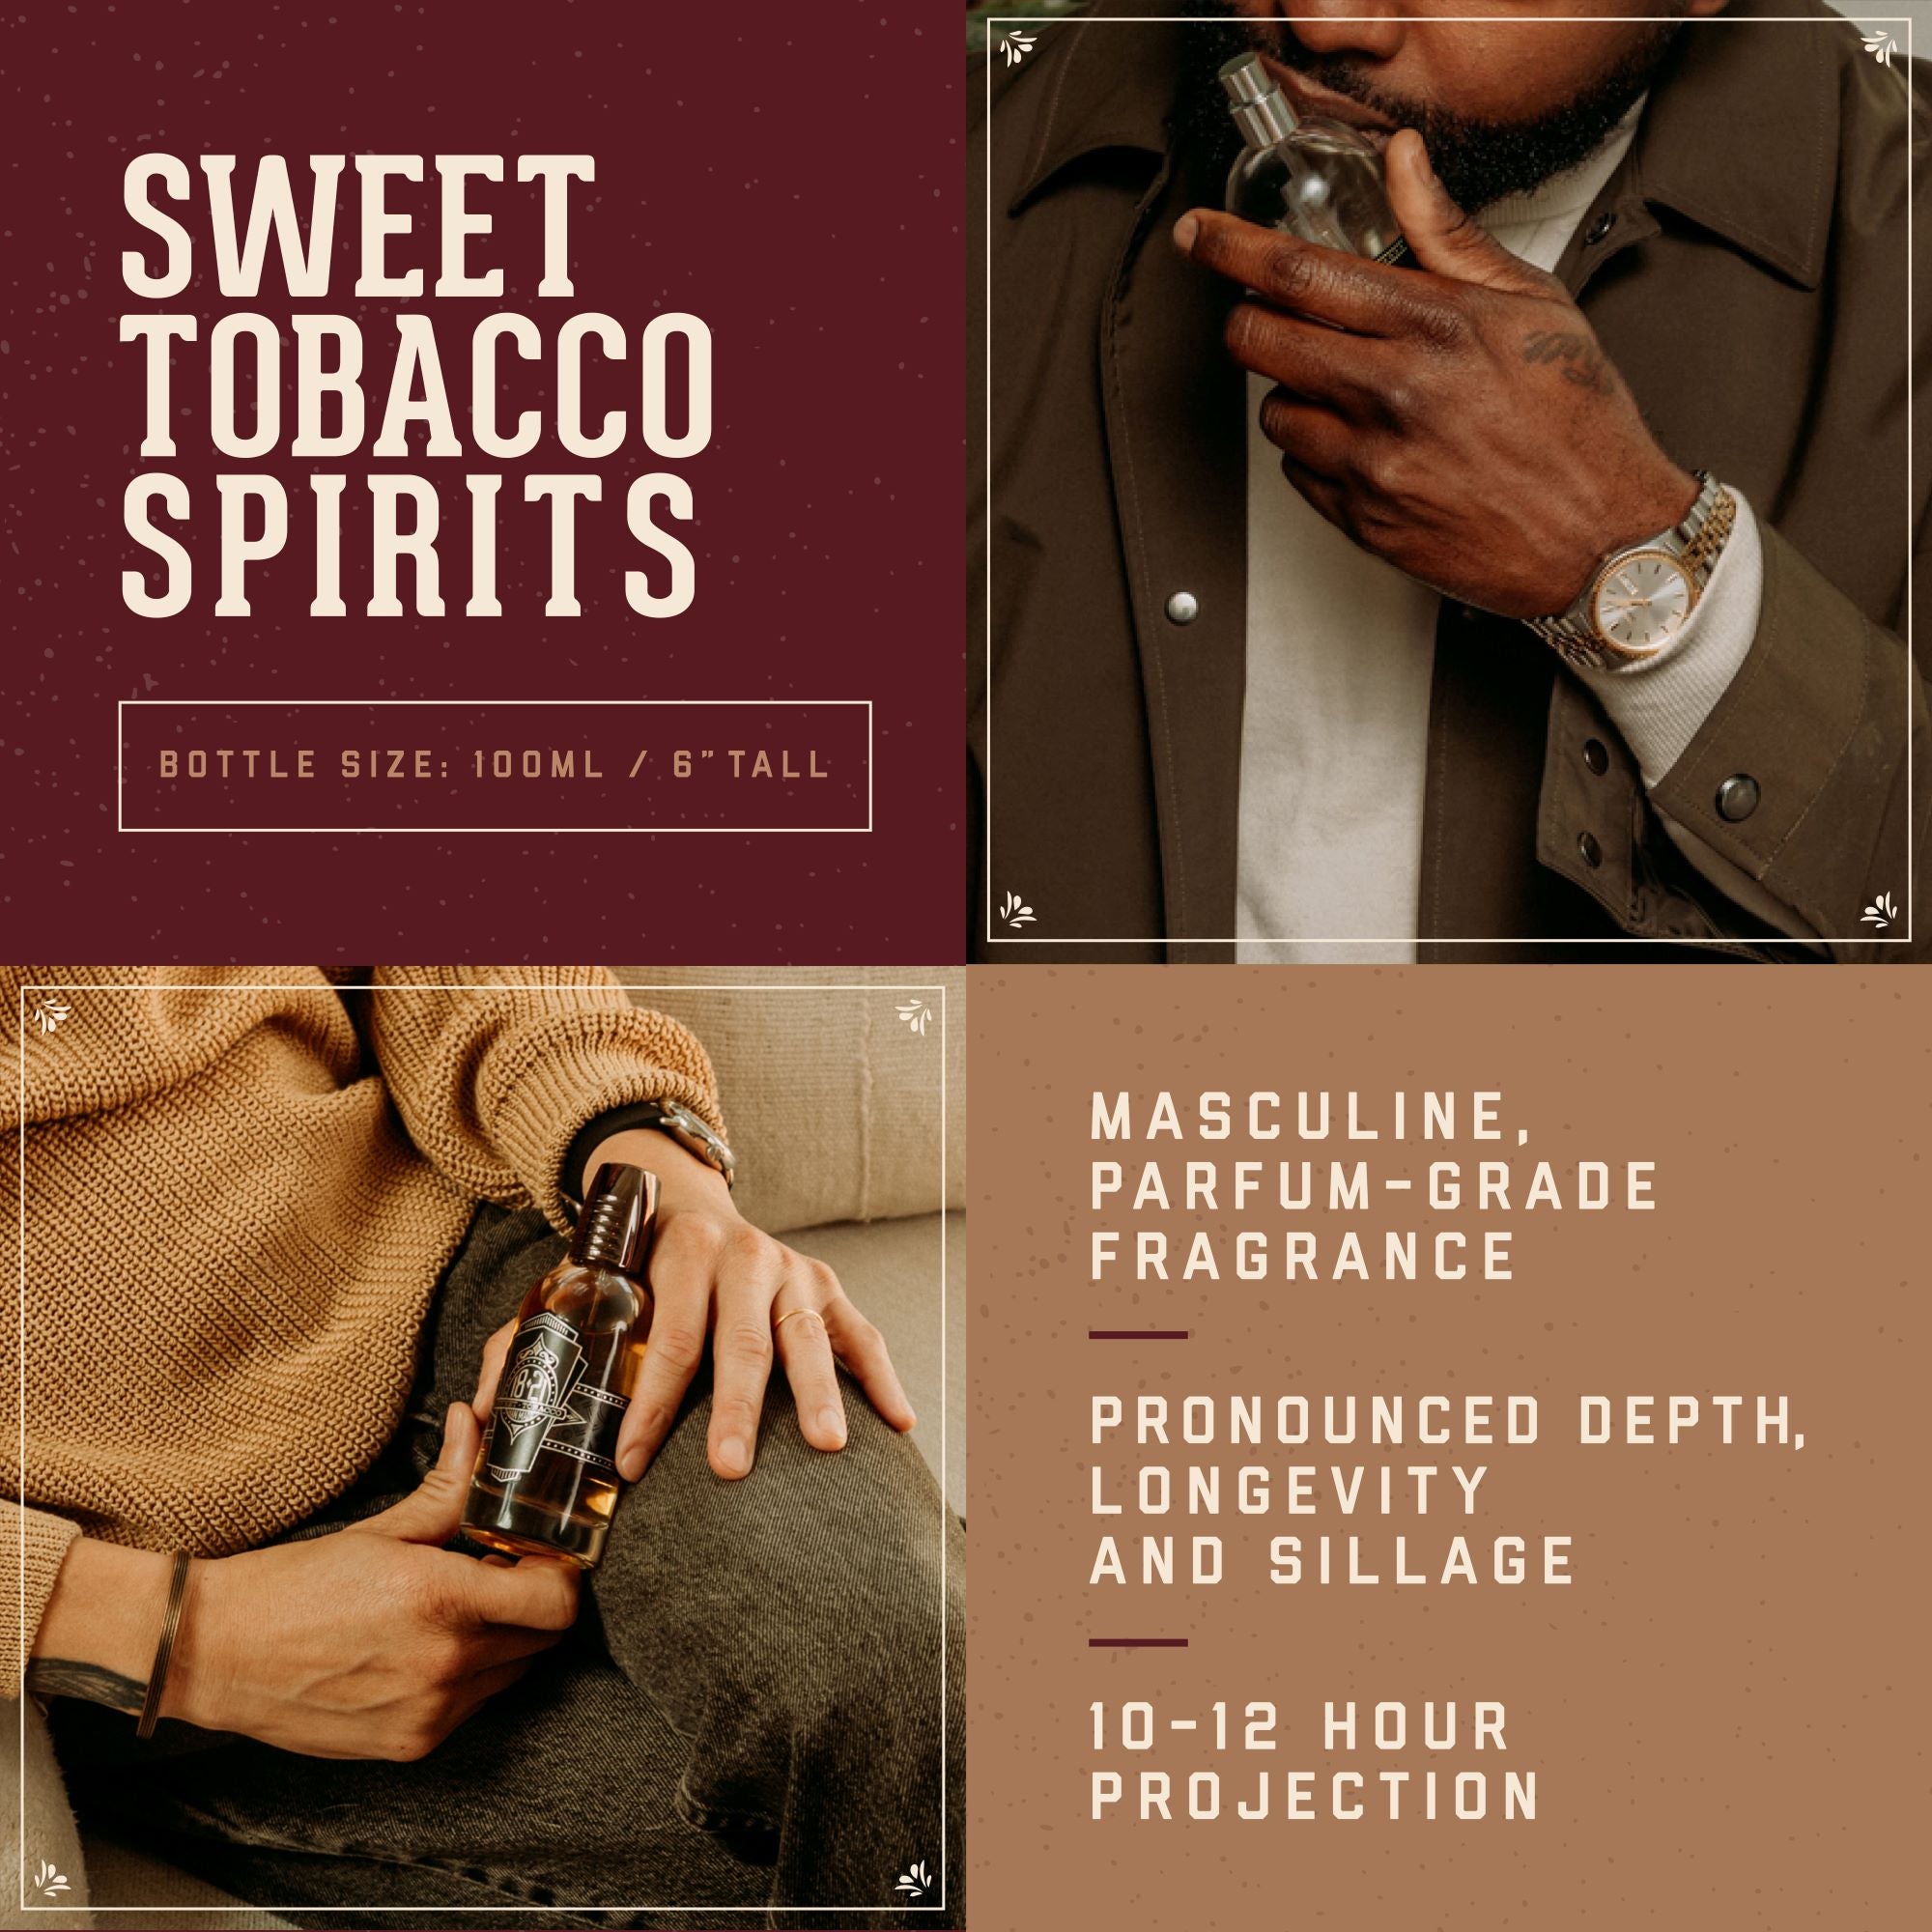 Sweet Tobacco Spirits.  Masculine, parfum-grade fragrance.  Pronounced depth, longetivity and sillage.  10-12 hour projection.